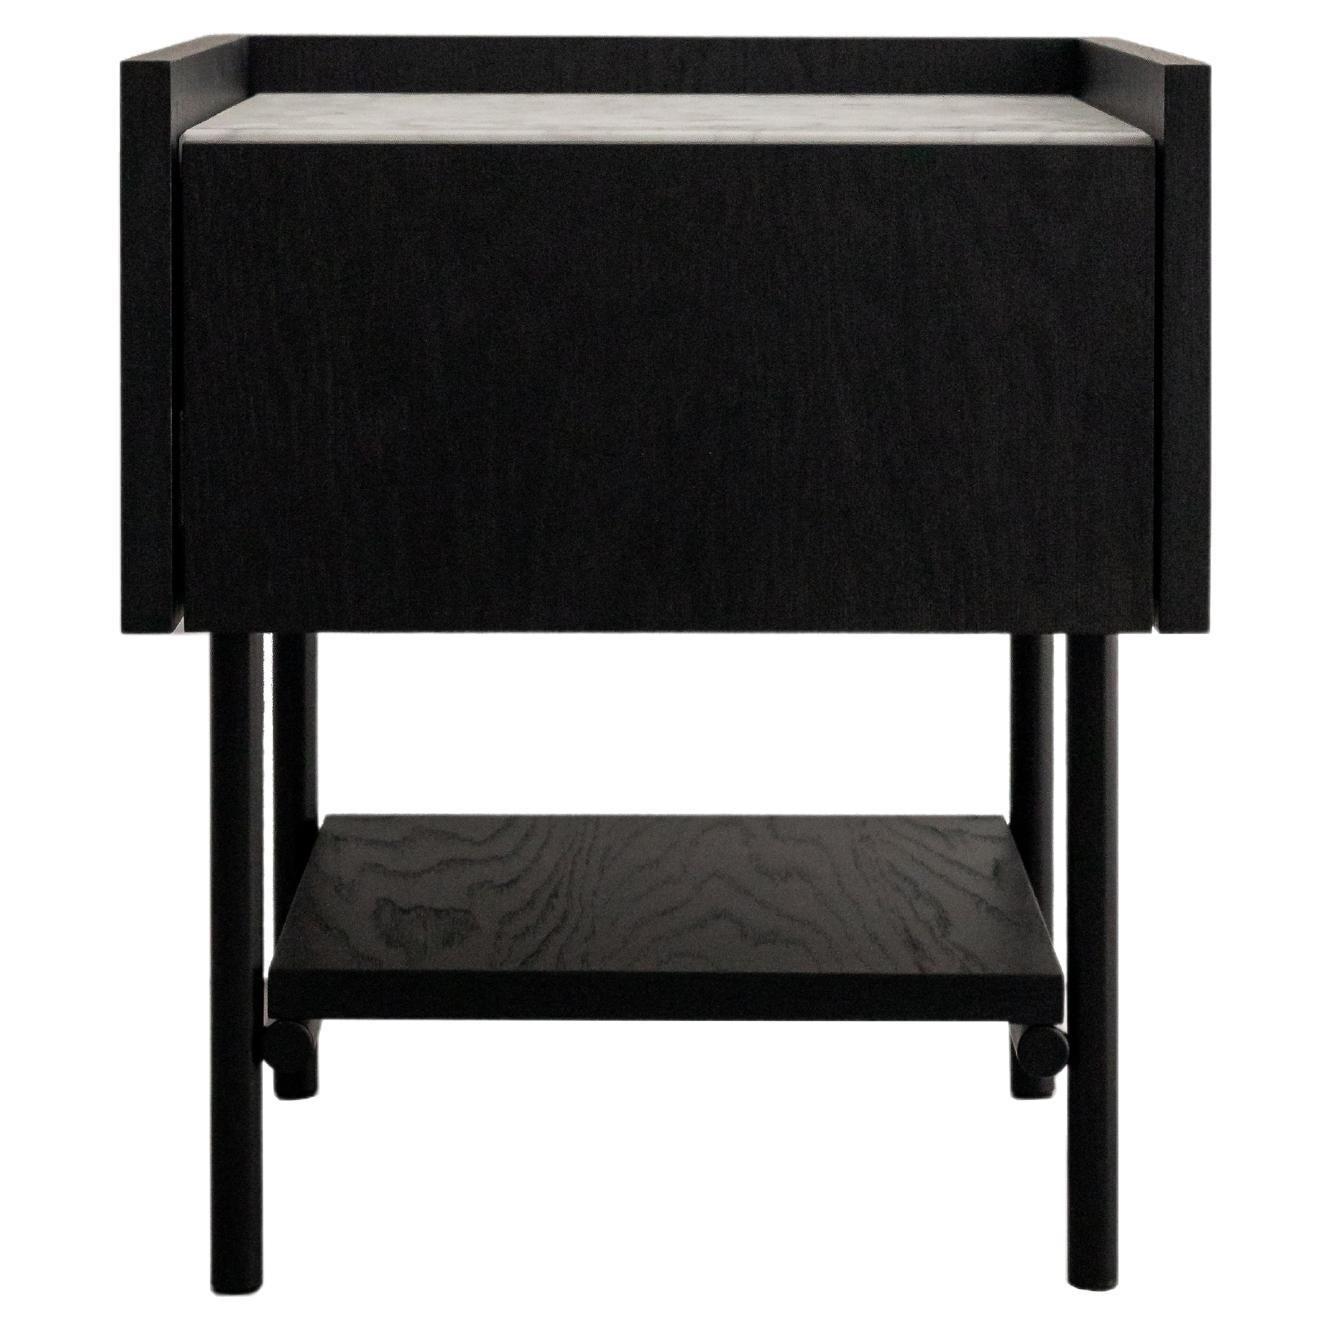 FORST nightstand is an elegant bedside table with a marble top and a comfortable drawer opened with the TIP ON system. The open shelf will allow you to conveniently store things that should always be at hand. The top of the table is finished with